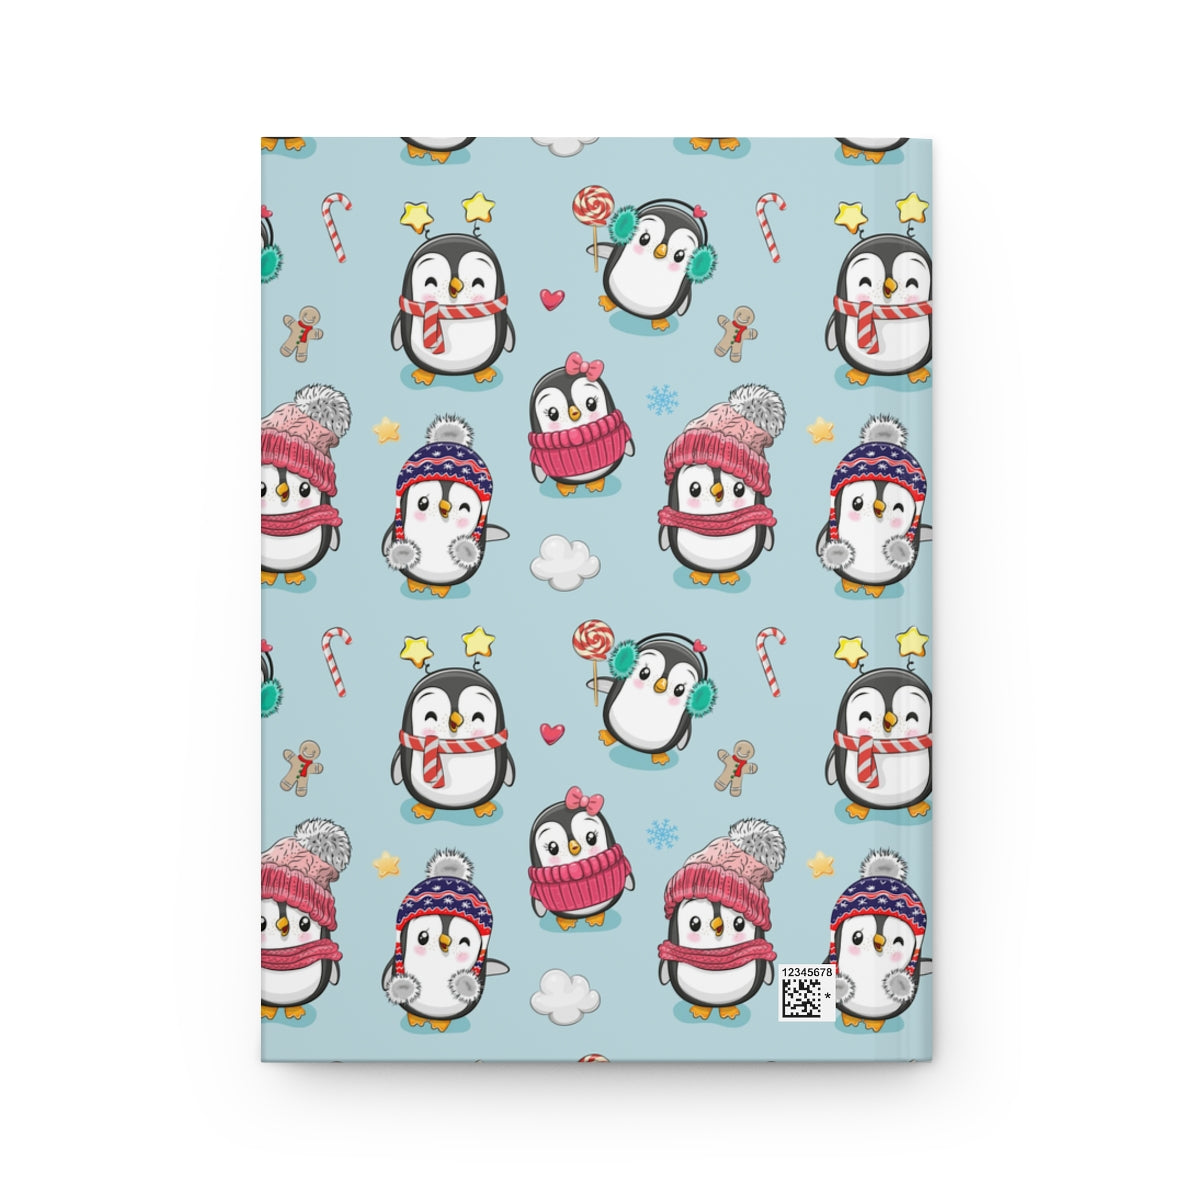 Penguins in Winter Clothes Hardcover Journal Matte